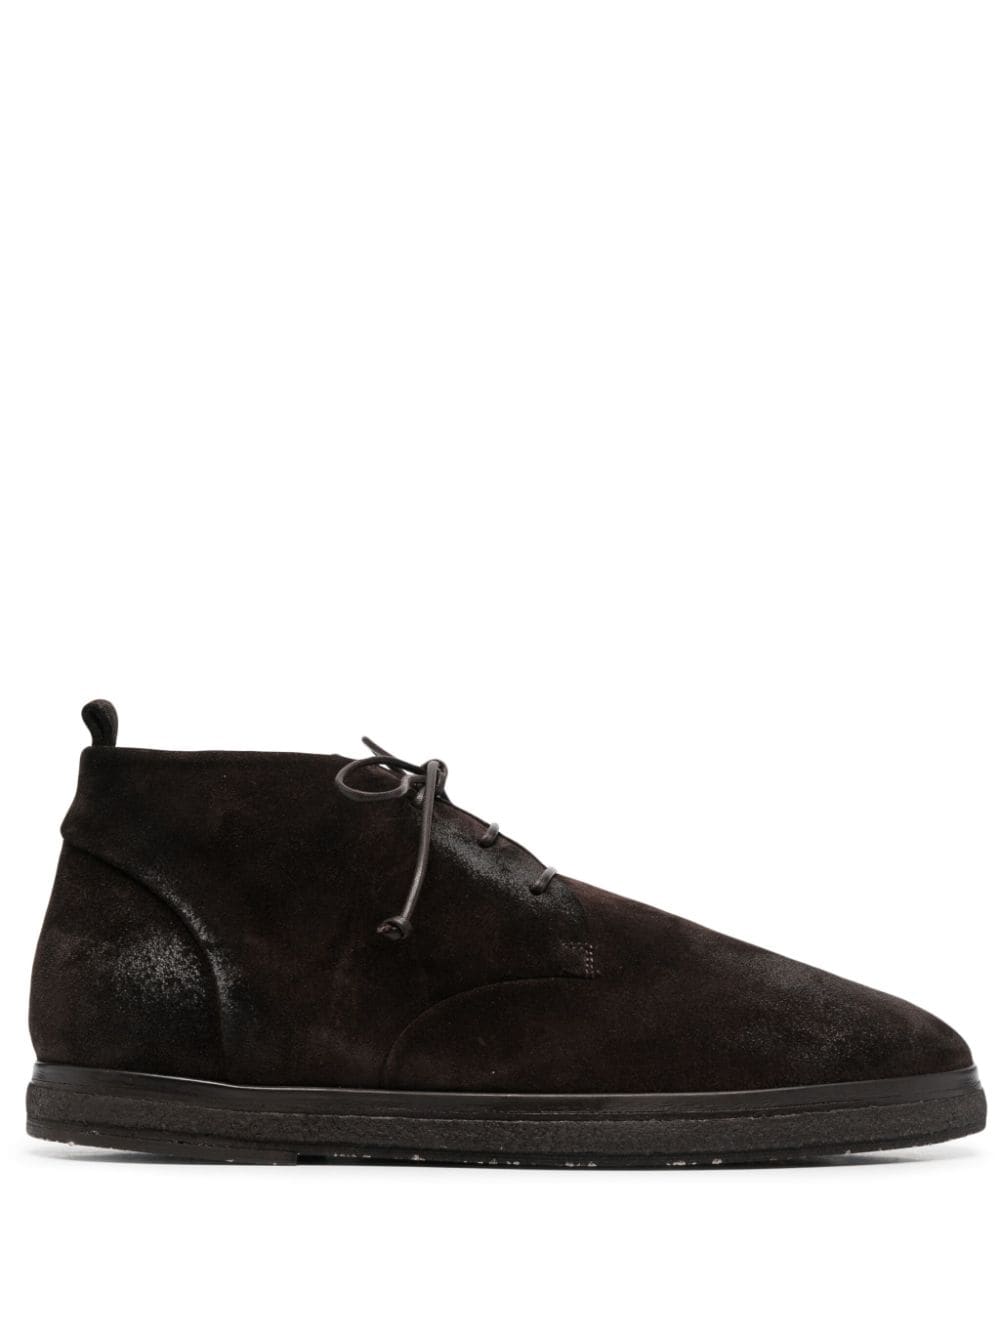 Marsèll Lace-up Suede Boots In Brown